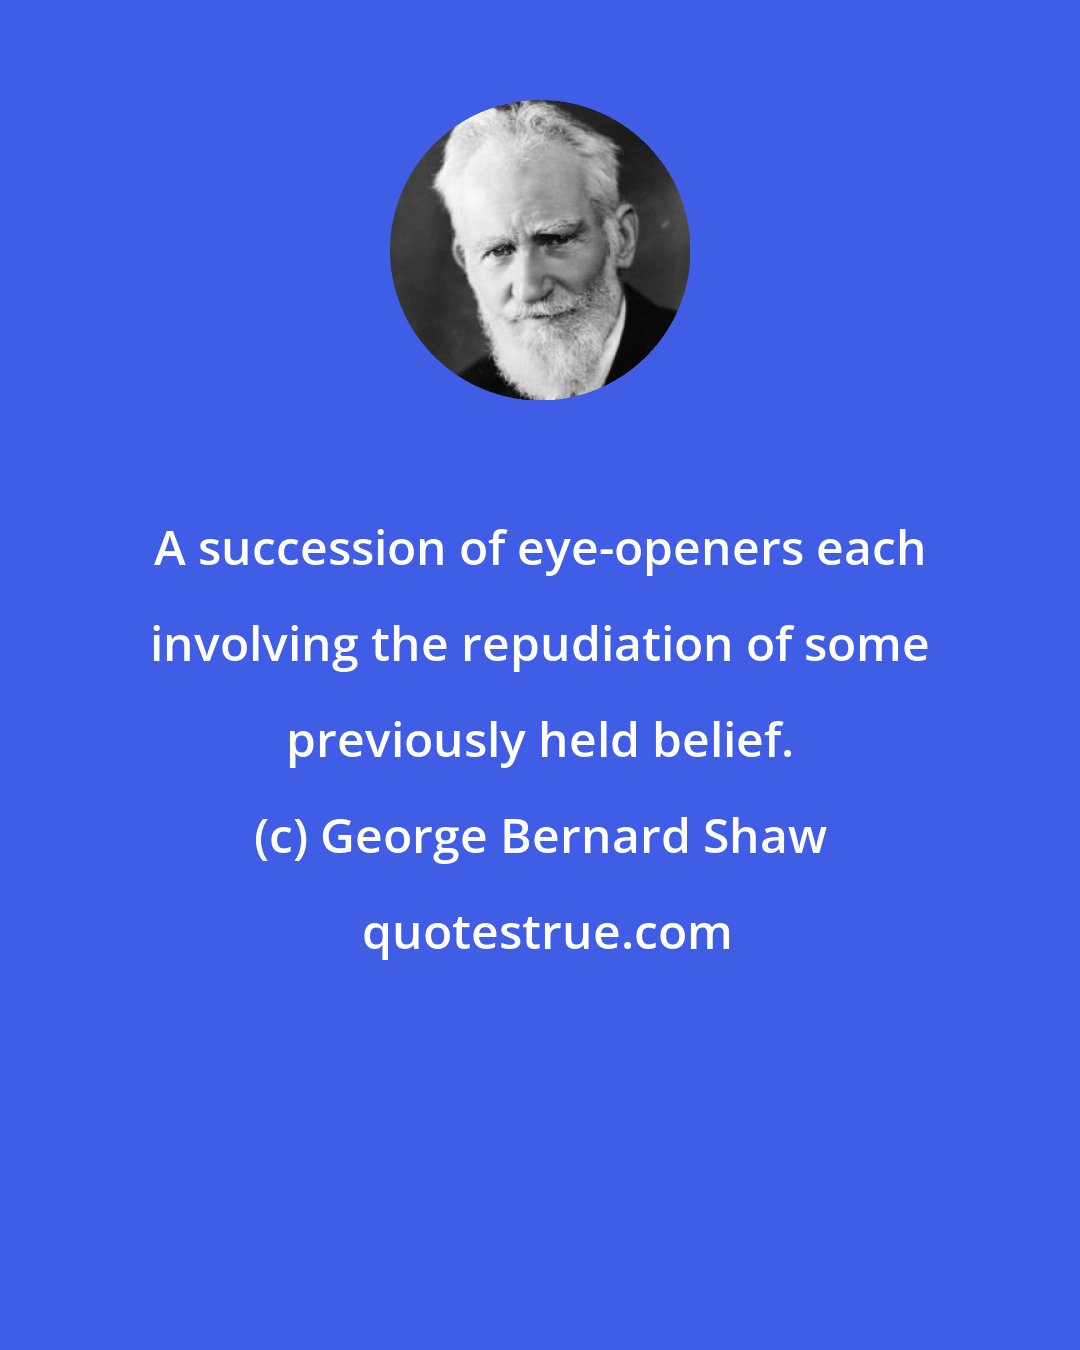 George Bernard Shaw: A succession of eye-openers each involving the repudiation of some previously held belief.